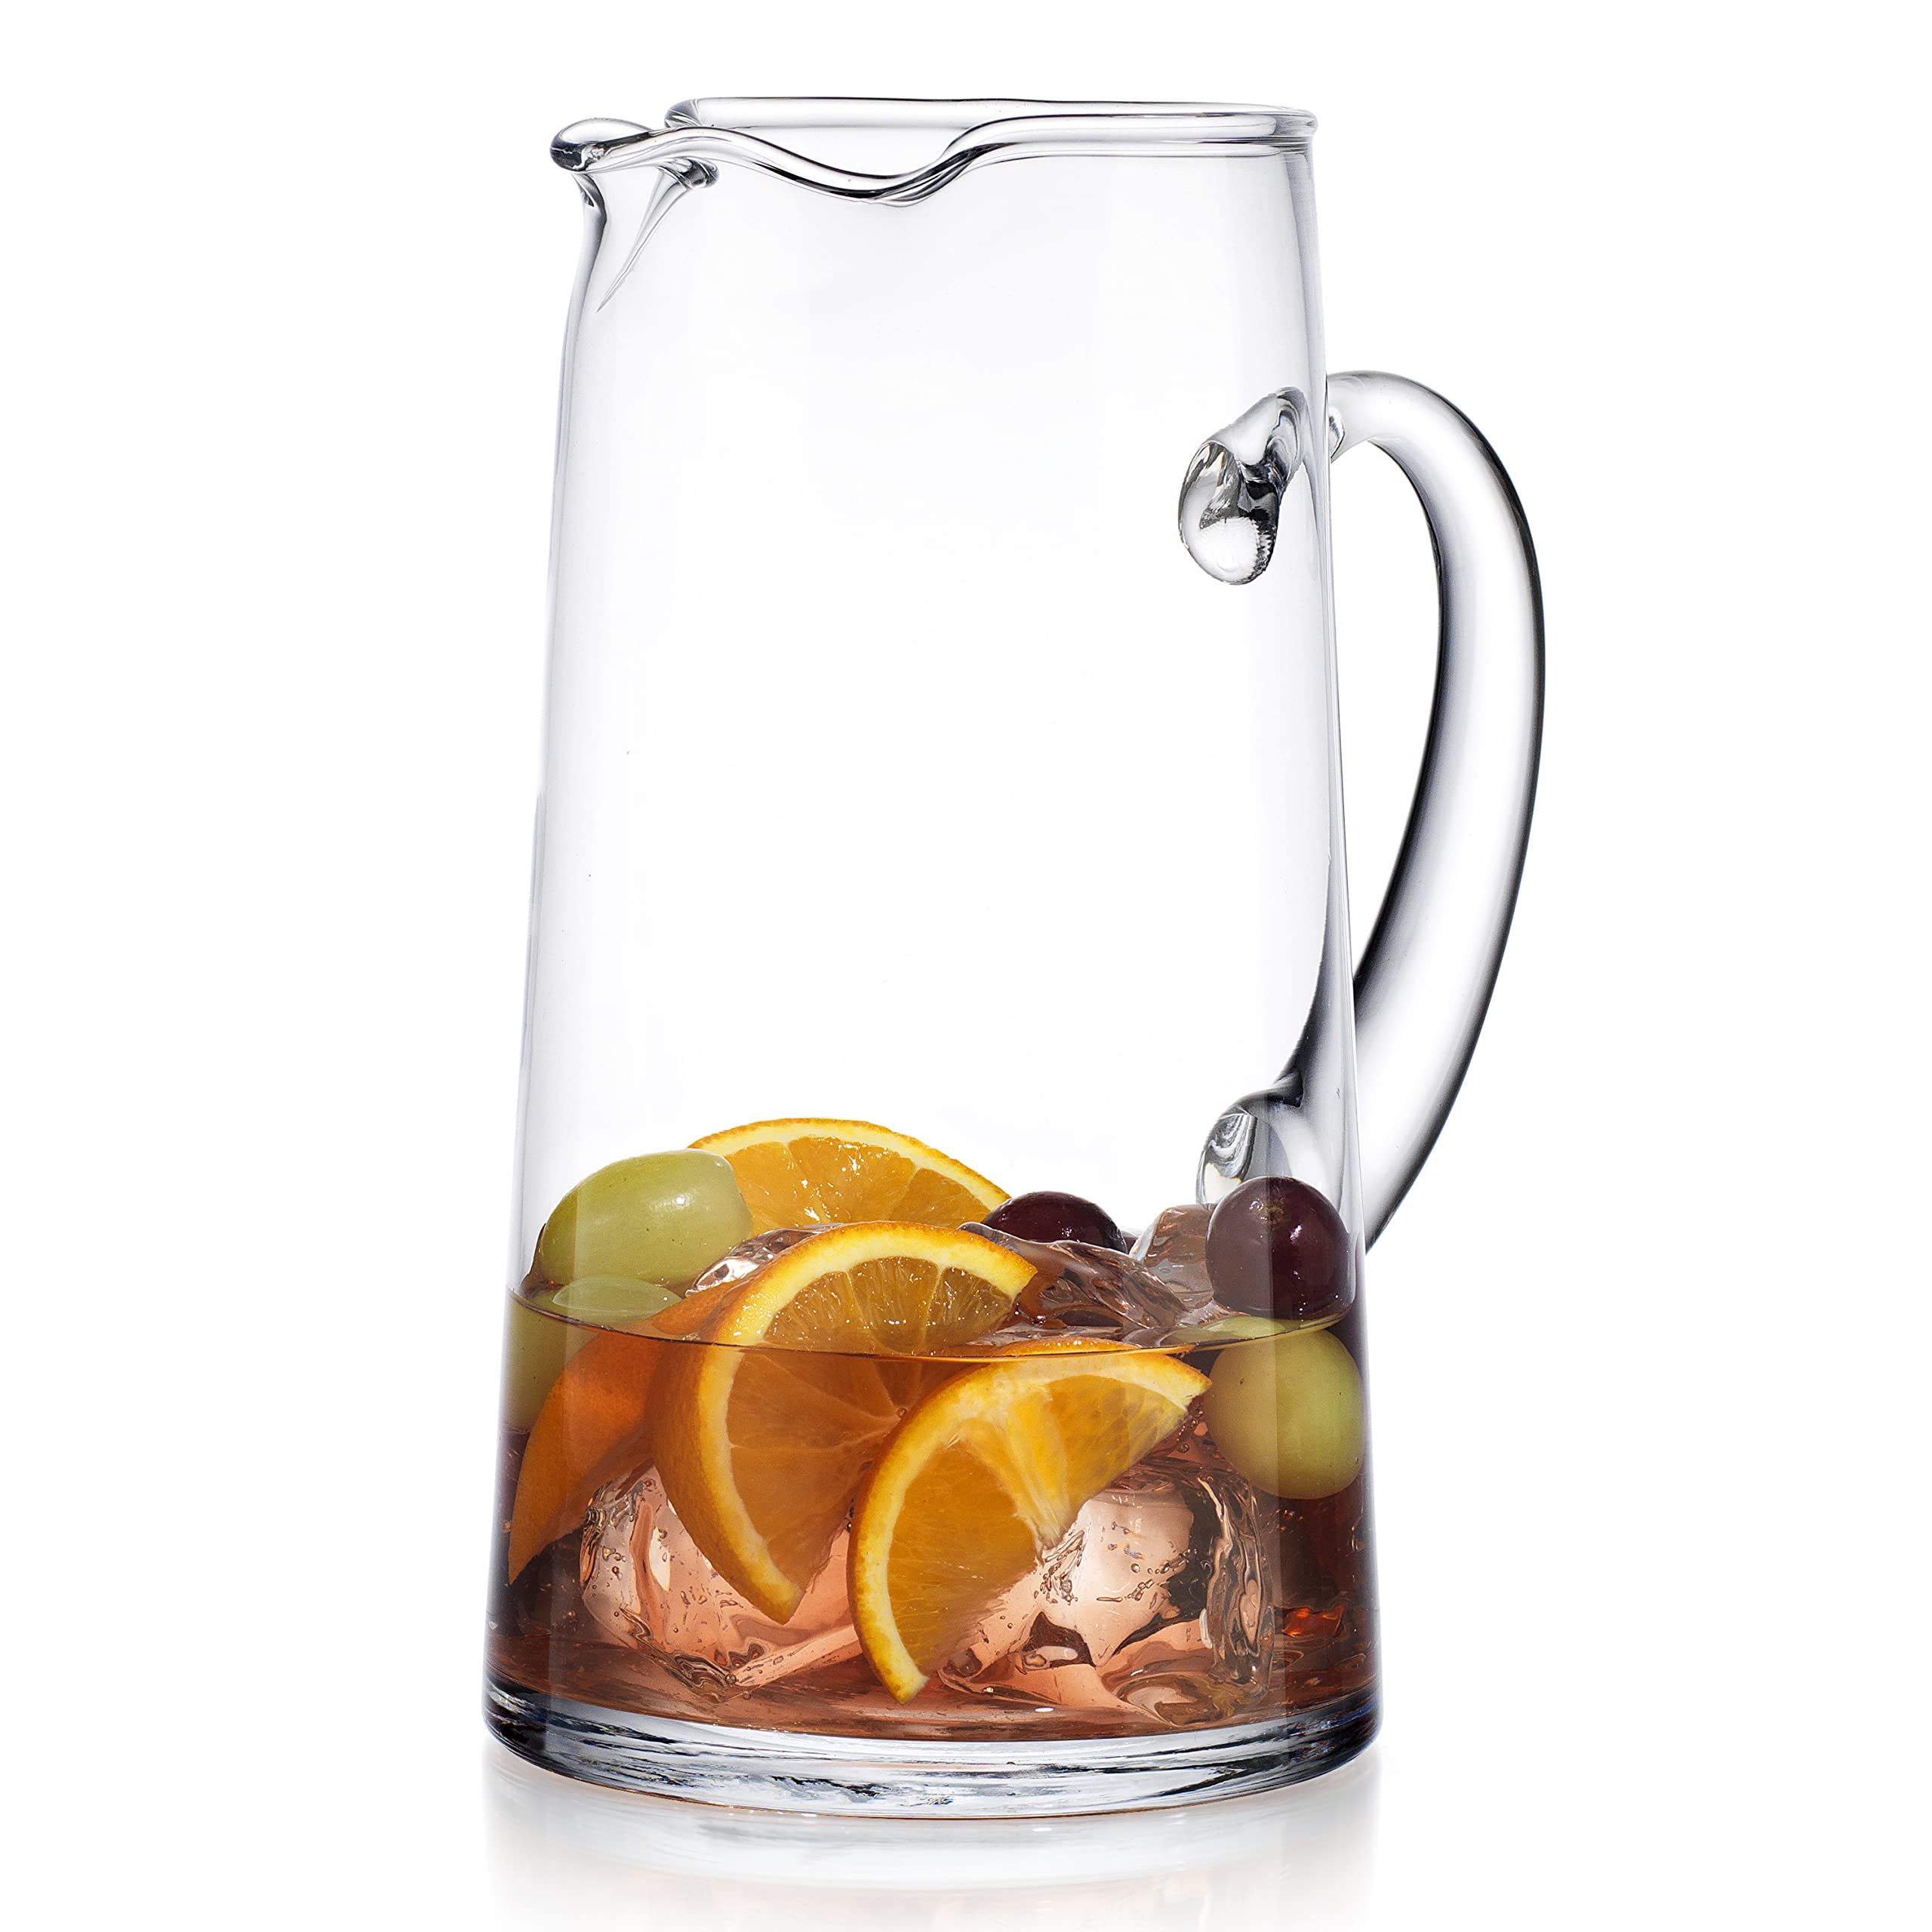 Glass Water Pitcher with Spout – Elegant Serving Carafe for Water, Juice, Sangria, Lemonade, and Cocktails – Crystal-Clear Glass Beverage Pitcher.  - Like New